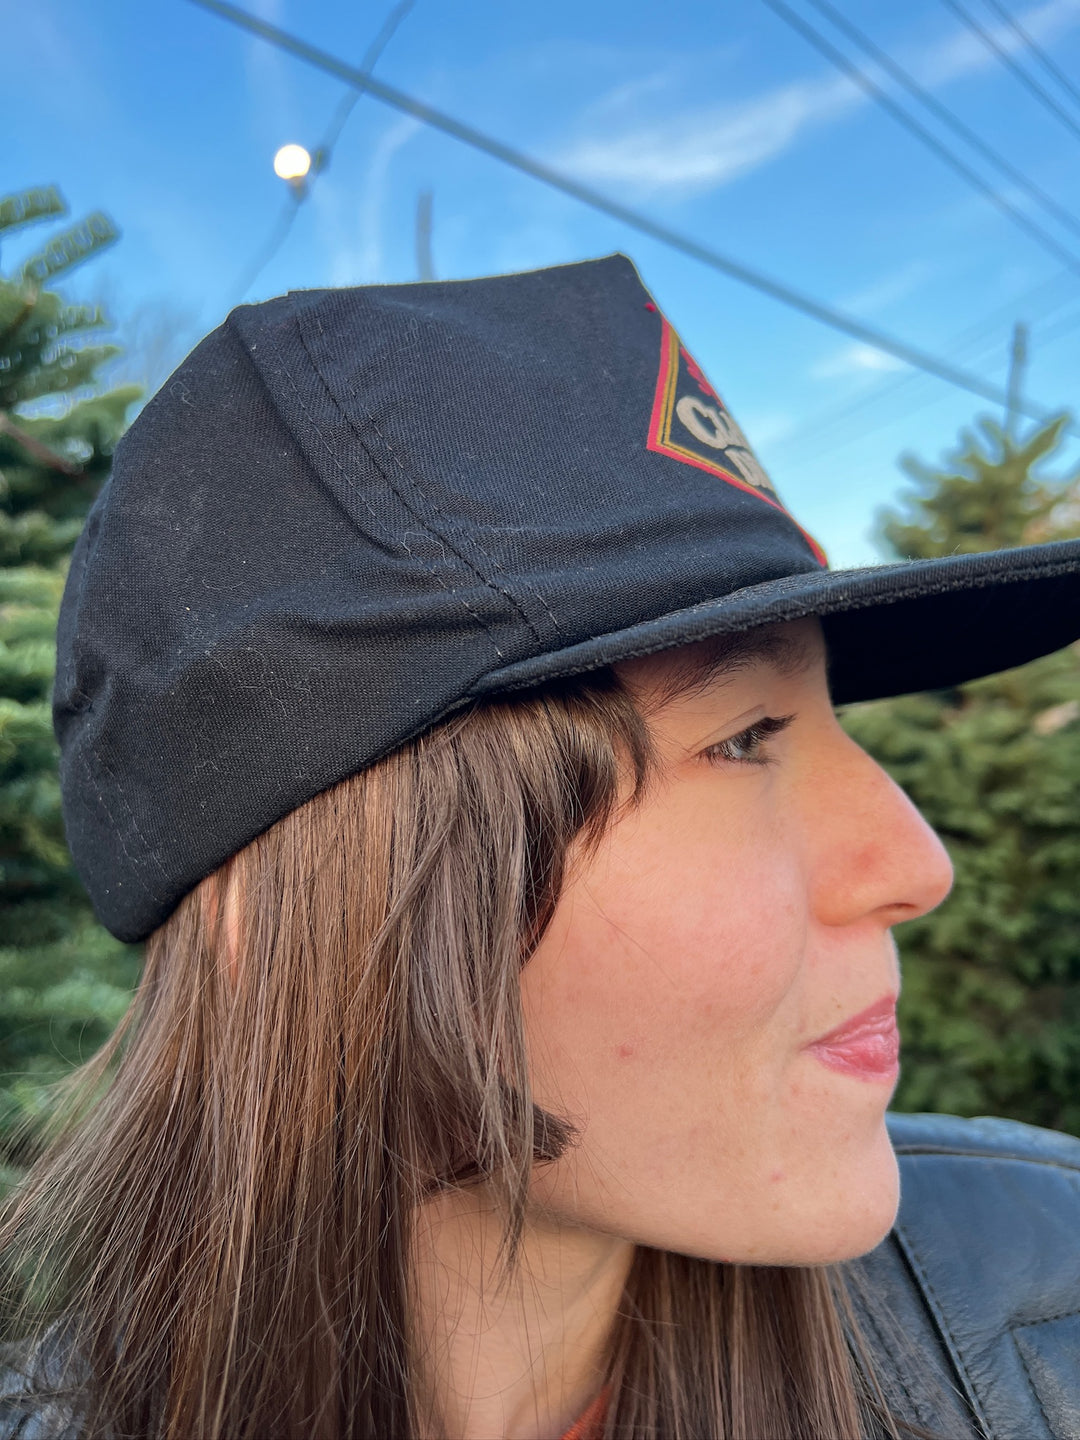 Vintage Trucker Hat: Old Style Classic Draft Beer